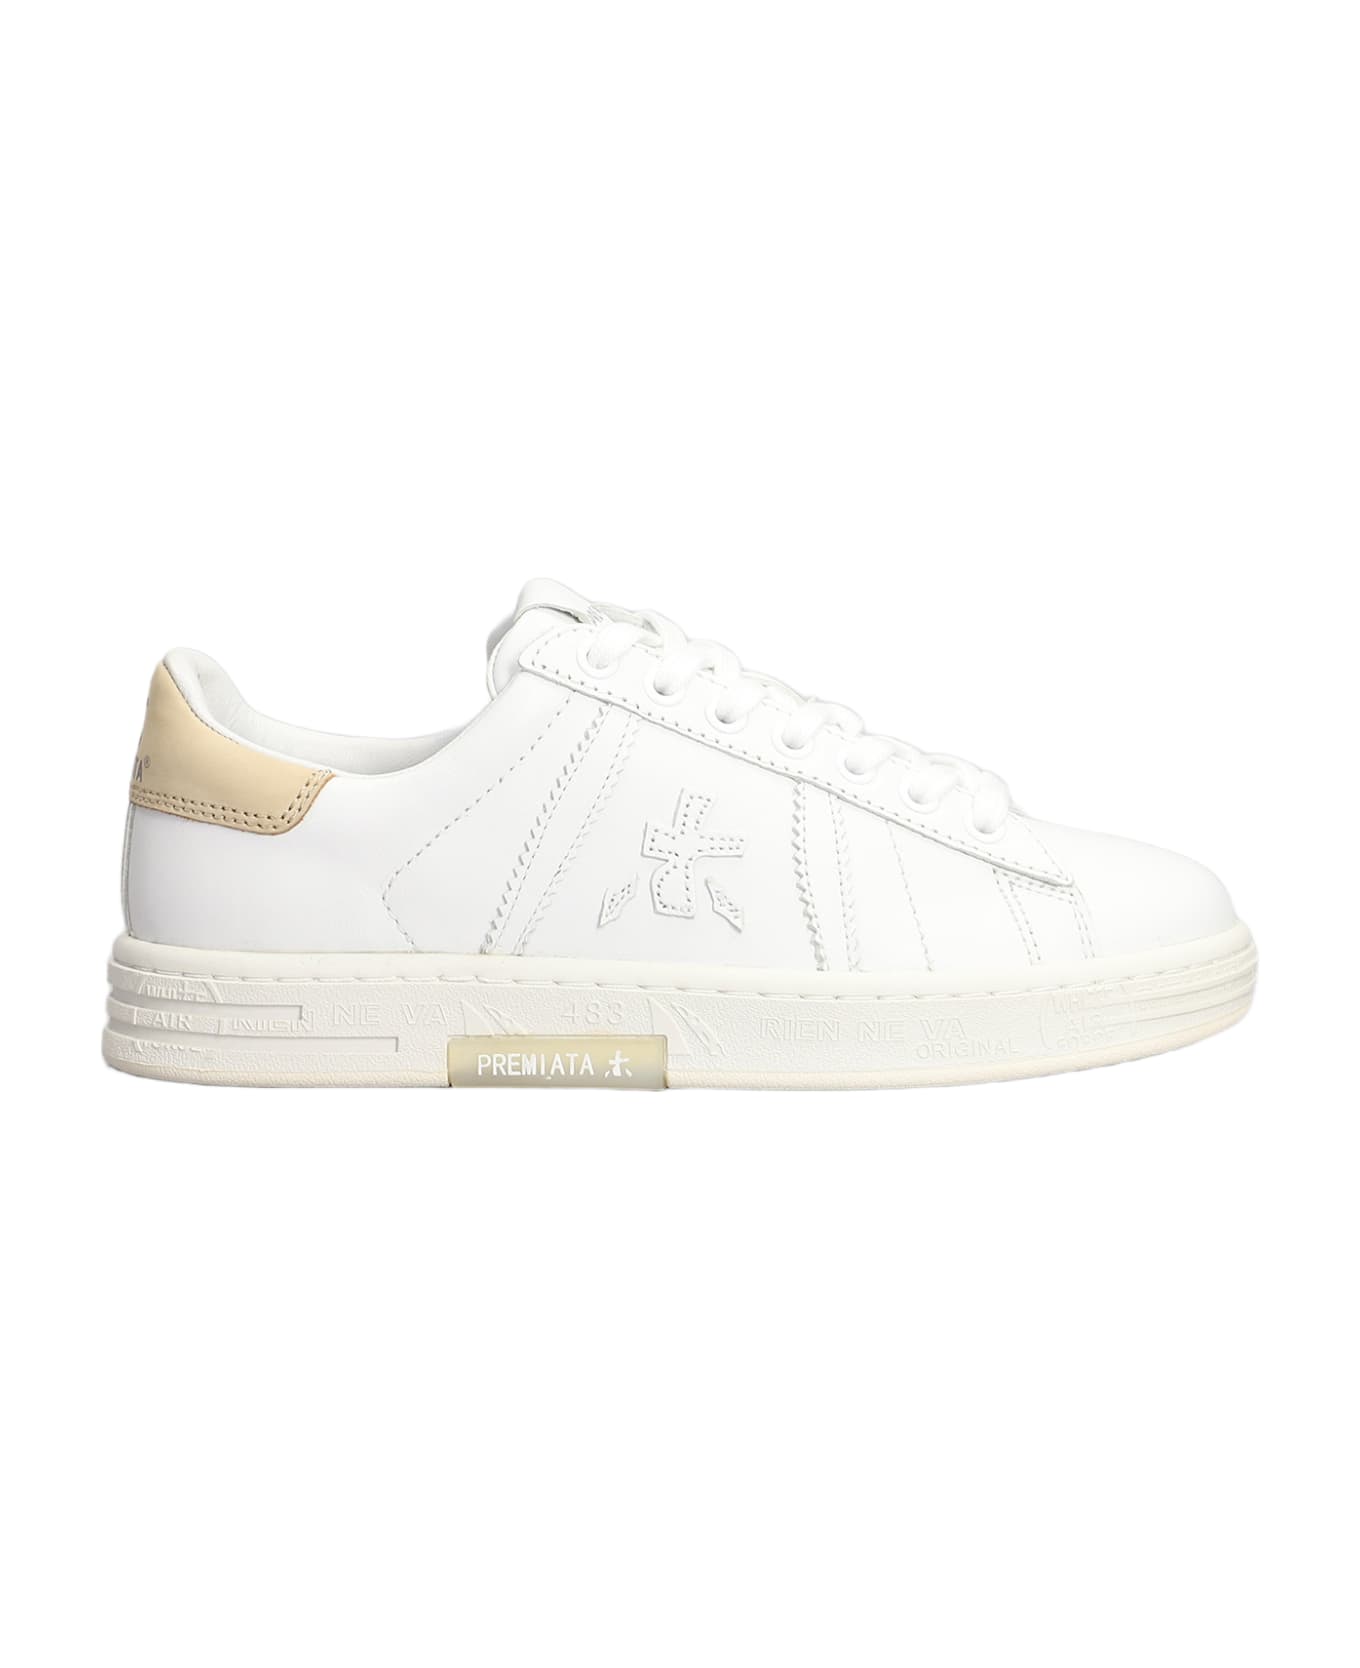 Premiata Russell Sneakers In White Leather - white